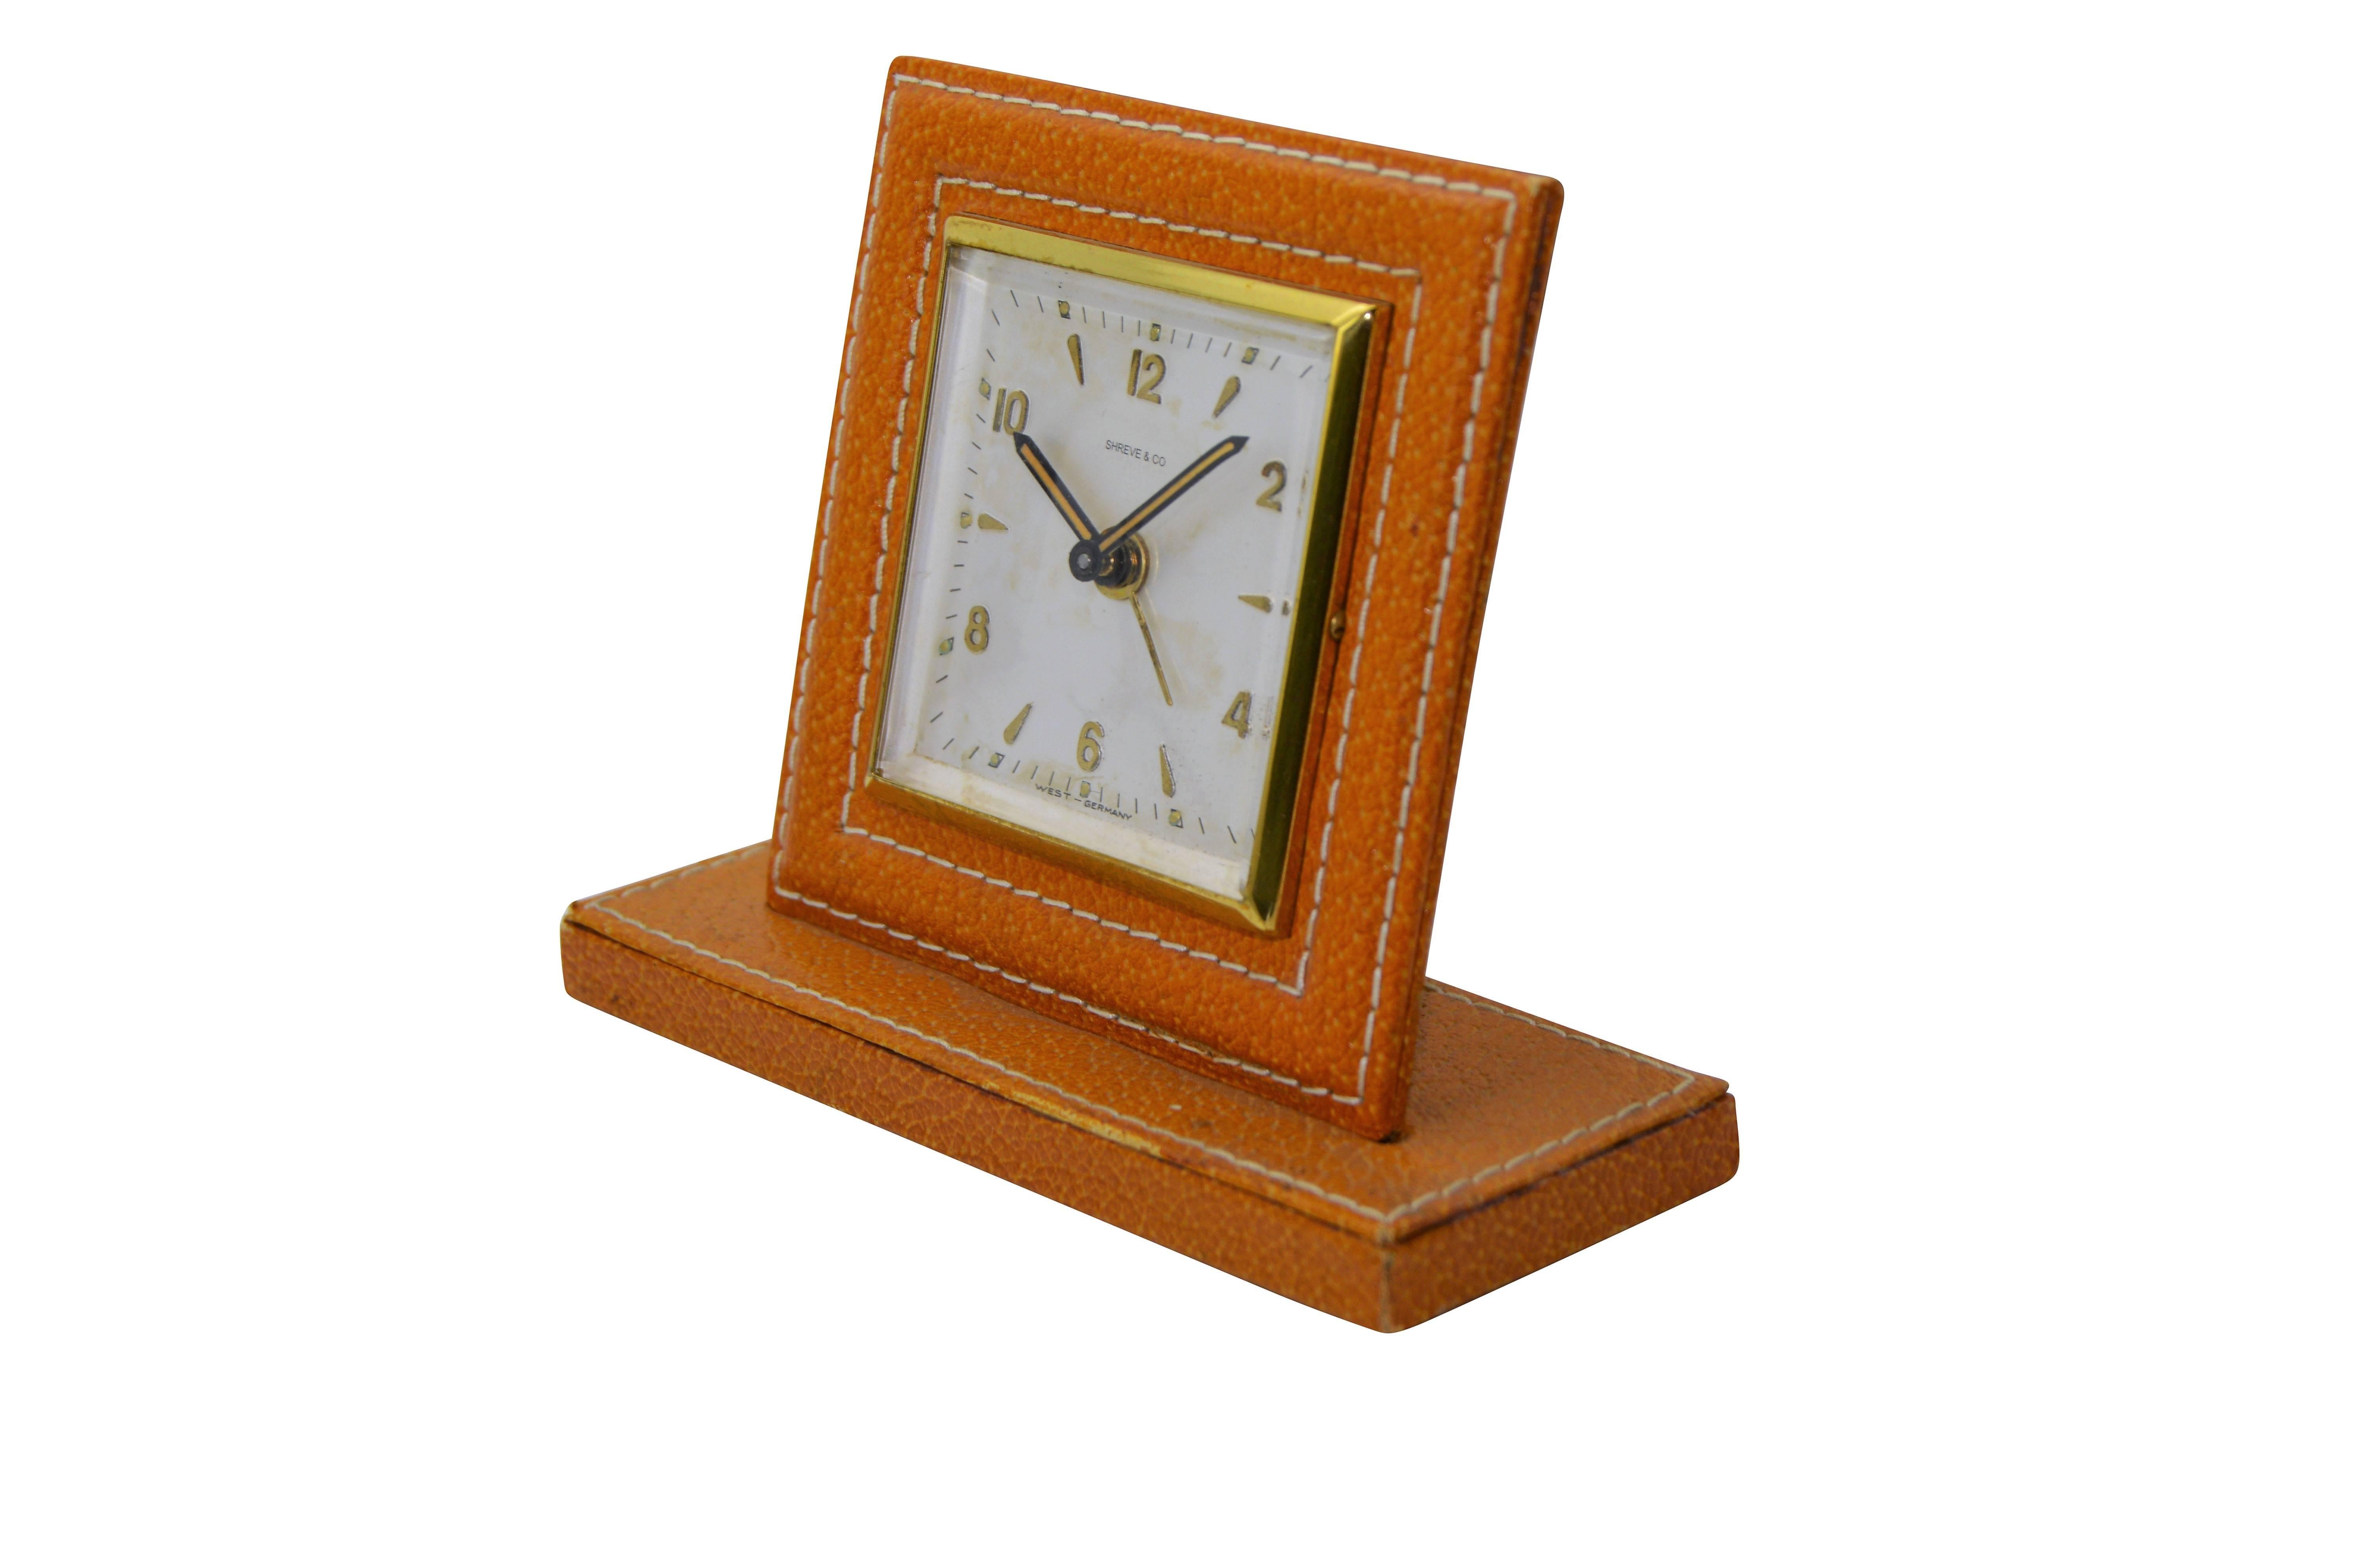 FACTORY / HOUSE: Shreve and Co.
STYLE / REFERENCE: Bedside Alarm 
MOVEMENT / CALIBER: Manual Winding
DIMENSIONS: 5